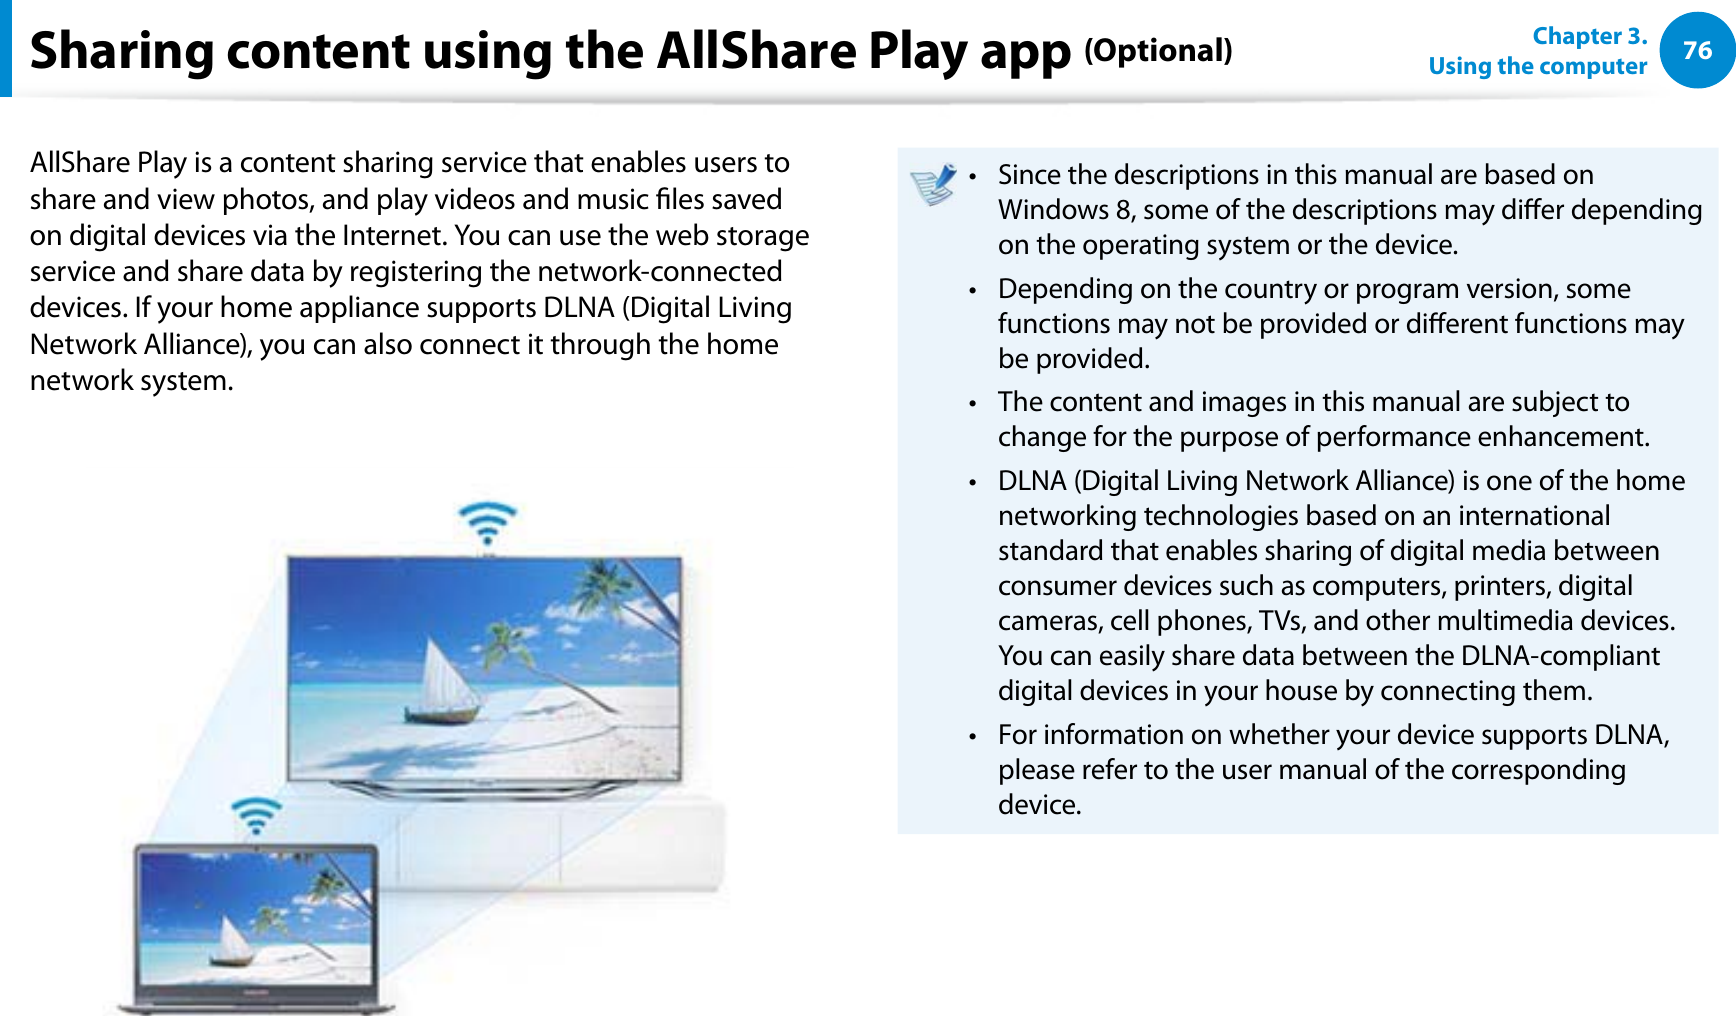 76Chapter 3.  Using the computerSharing content using the AllShare Play app (Optional)AllShare Play is a content sharing service that enables users to share and view photos, and play videos and music les saved on digital devices via the Internet. You can use the web storage service and share data by registering the network-connected devices. If your home appliance supports DLNA (Digital Living Network Alliance), you can also connect it through the home network system.Since the descriptions in this manual are based on t Windows 8, some of the descriptions may dier depending on the operating system or the device.Depending on the country or program version, some t functions may not be provided or dierent functions may be provided.The content and images in this manual are subject to t change for the purpose of performance enhancement.DLNA (Digital Living Network Alliance) is one of the home t networking technologies based on an international standard that enables sharing of digital media between consumer devices such as computers, printers, digital cameras, cell phones, TVs, and other multimedia devices. You can easily share data between the DLNA-compliant digital devices in your house by connecting them.For information on whether your device supports DLNA, t please refer to the user manual of the corresponding device.